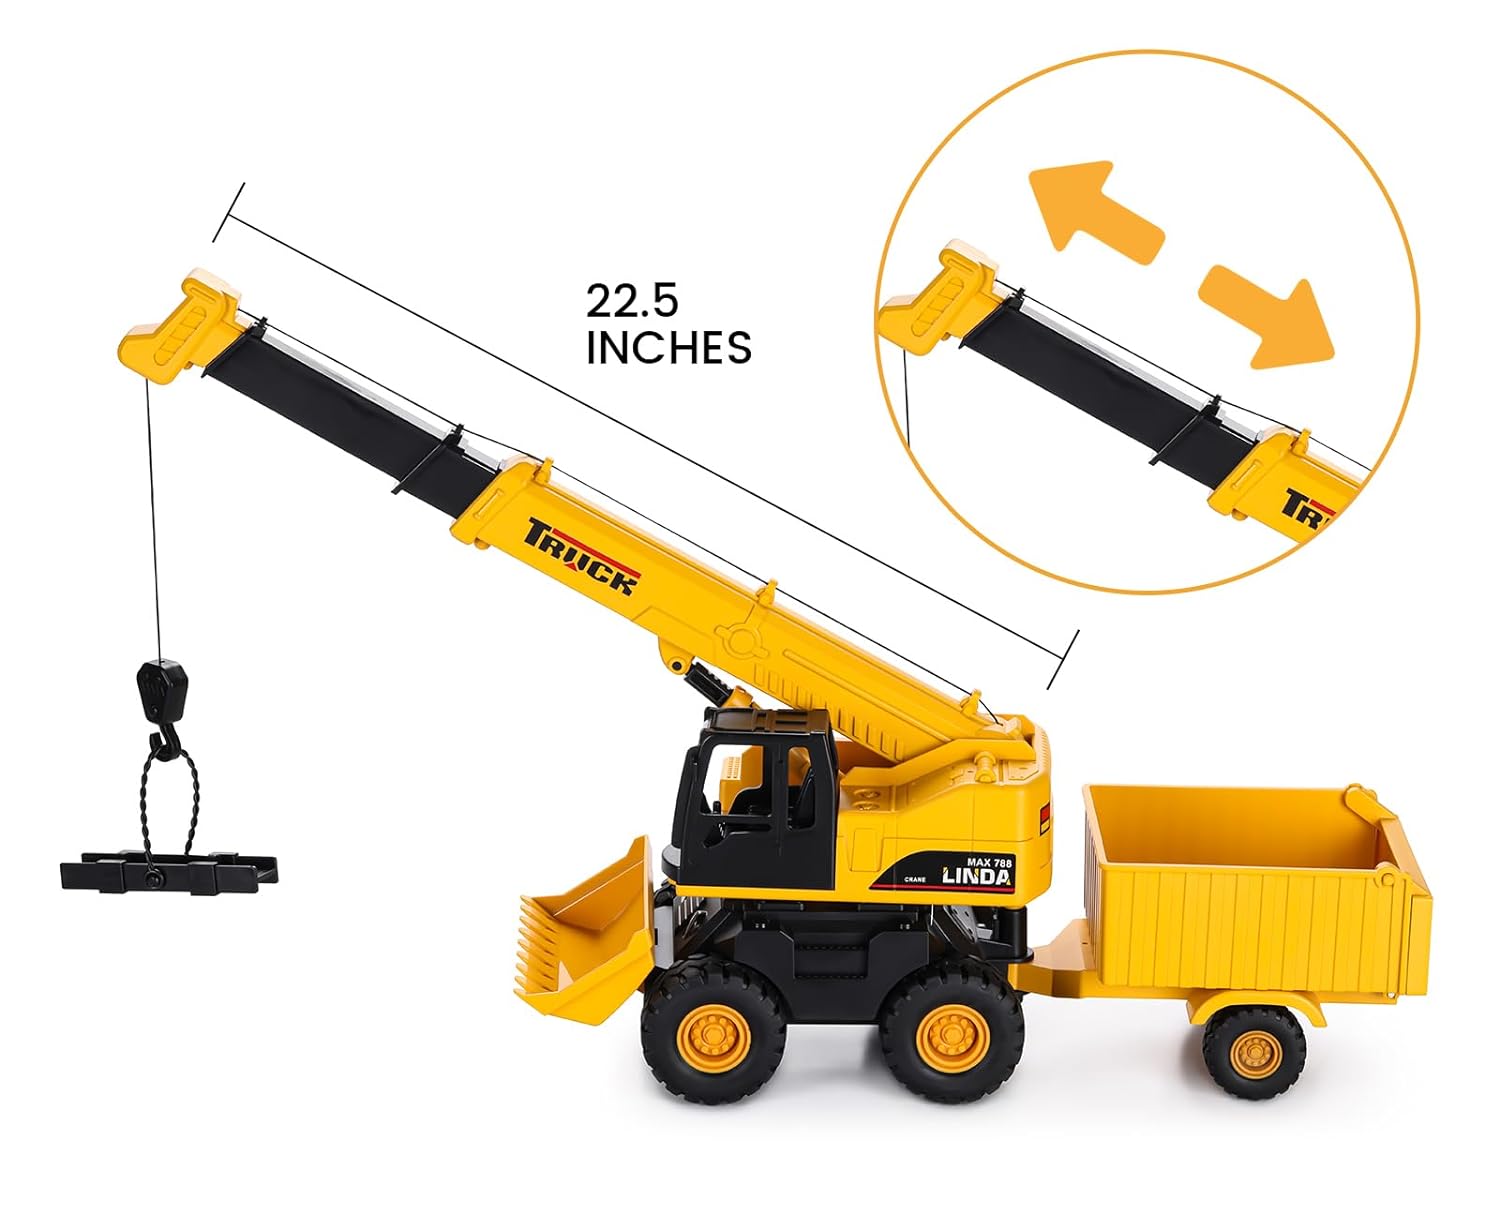 Construction Simulation Crane and Excavator Toy for Kids Toy Vehicles Building Toy Set with Lights and Sounds